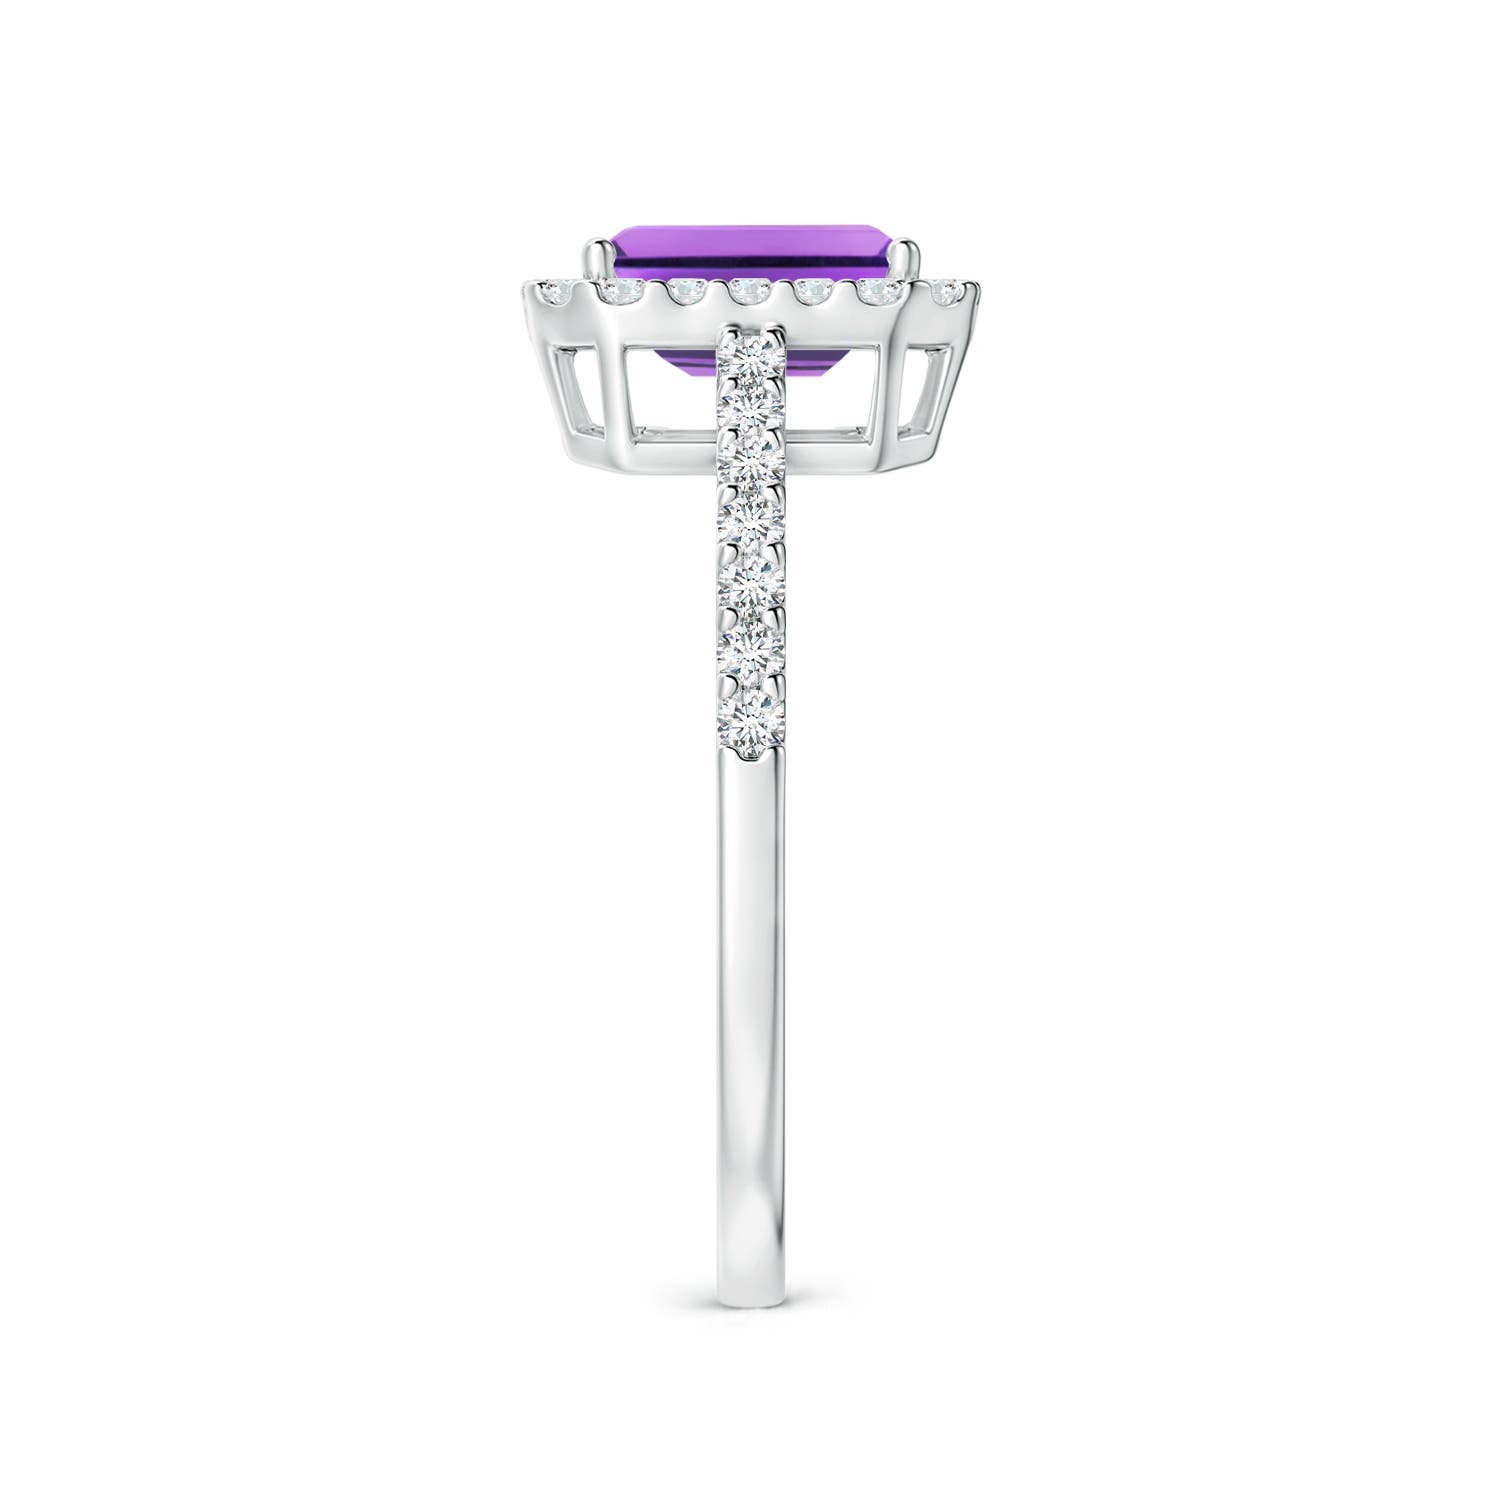 AA - Amethyst / 1.23 CT / 14 KT White Gold